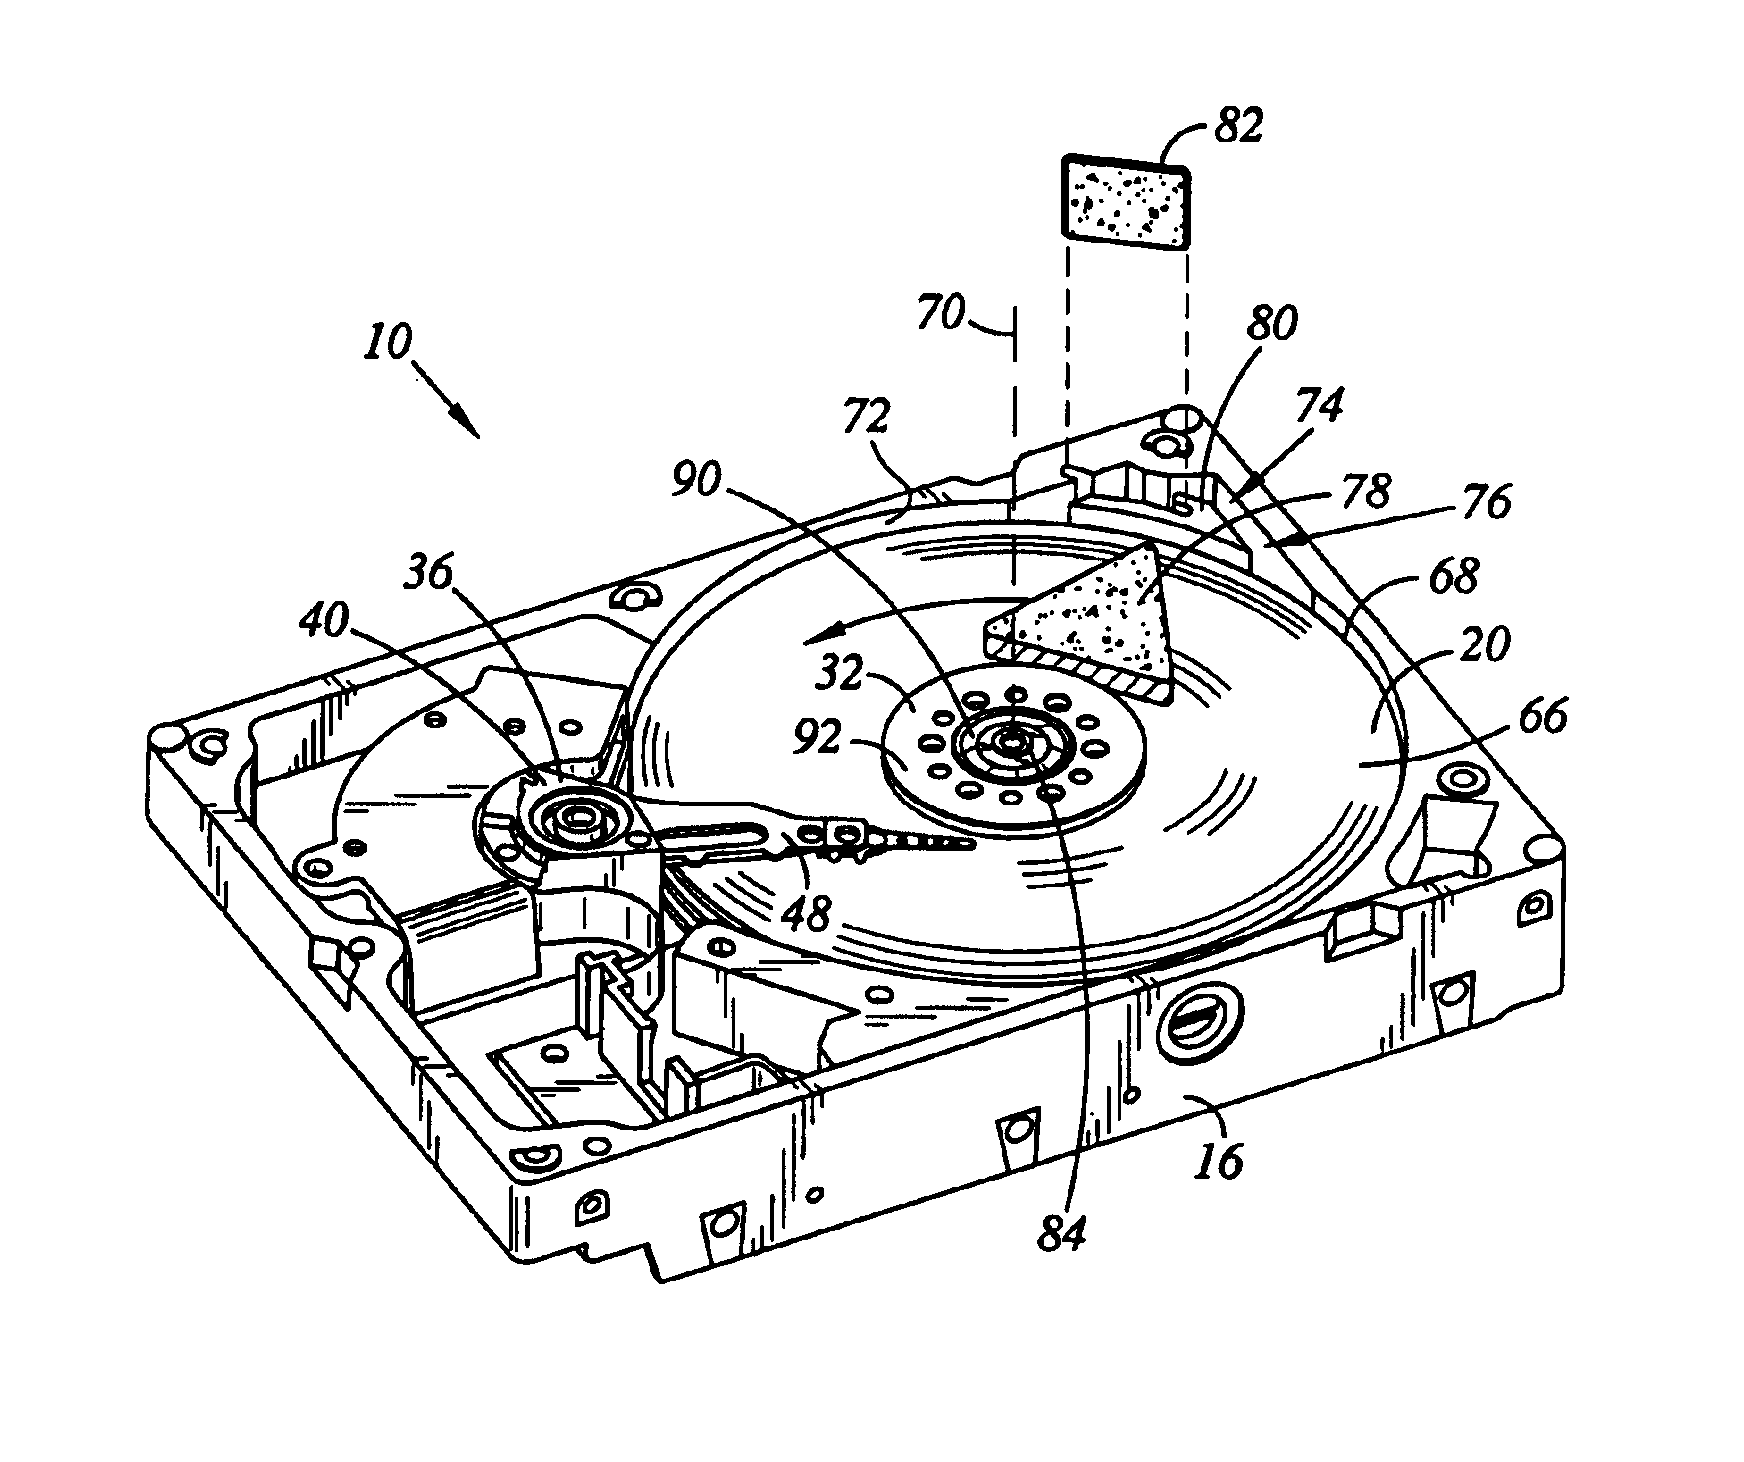 Disk drive including an airflow diverter element radially between spindle motor axis of rotation and cavity in shroud surface